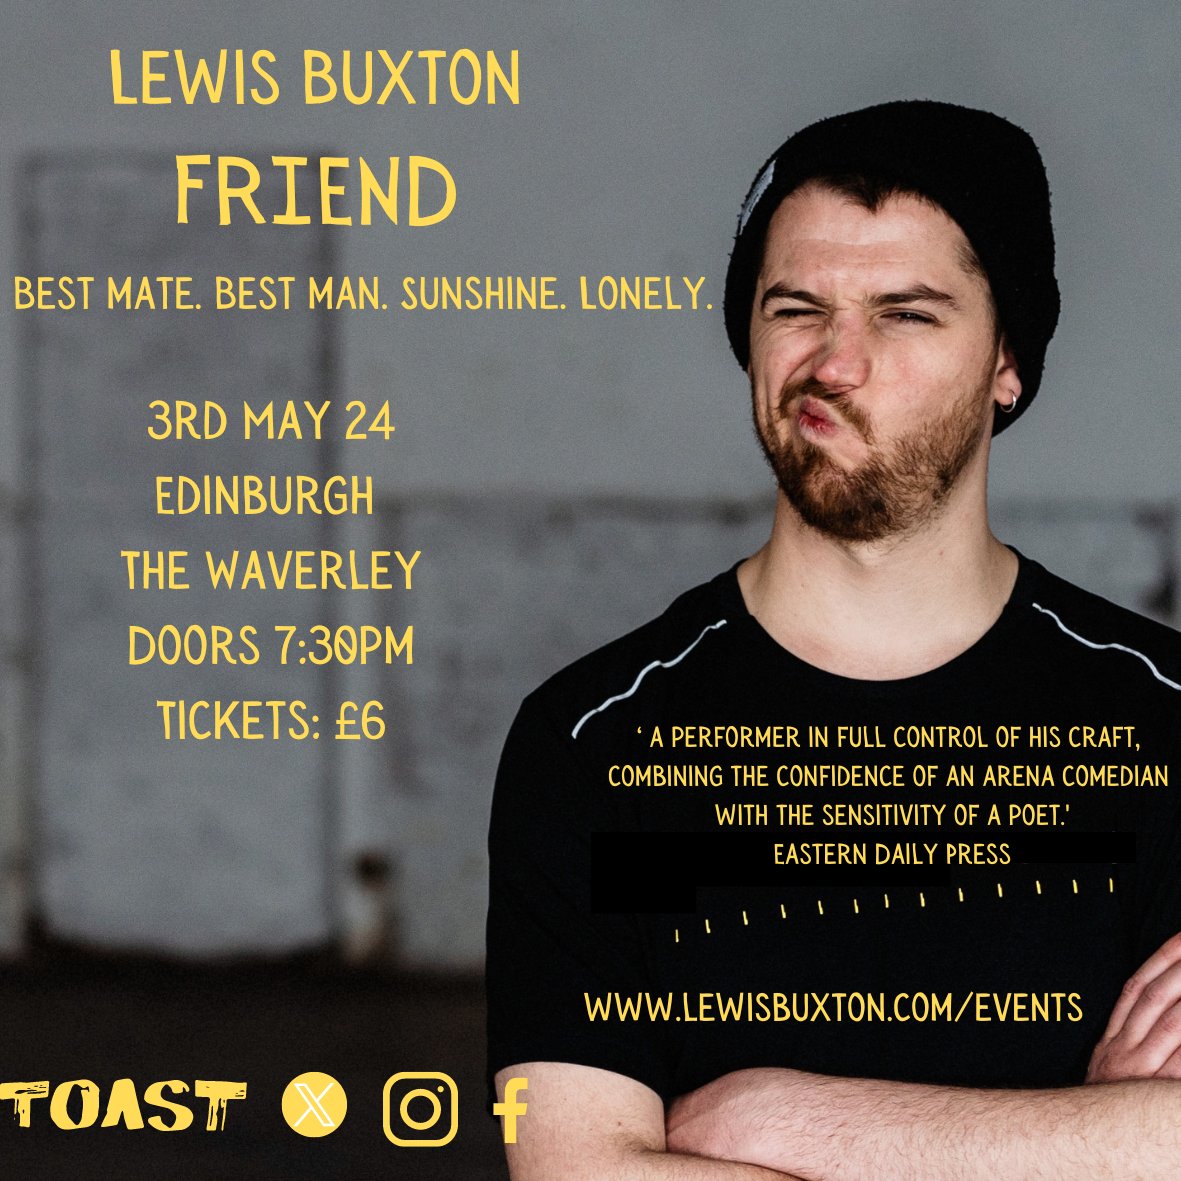 Very much looking forward to seeing the fabulous @LewisBuxton93 on Friday! Would be lovely to see the Edinburgh scene turn out and support. Tix: eventbrite.co.uk/e/lewis-buxton…